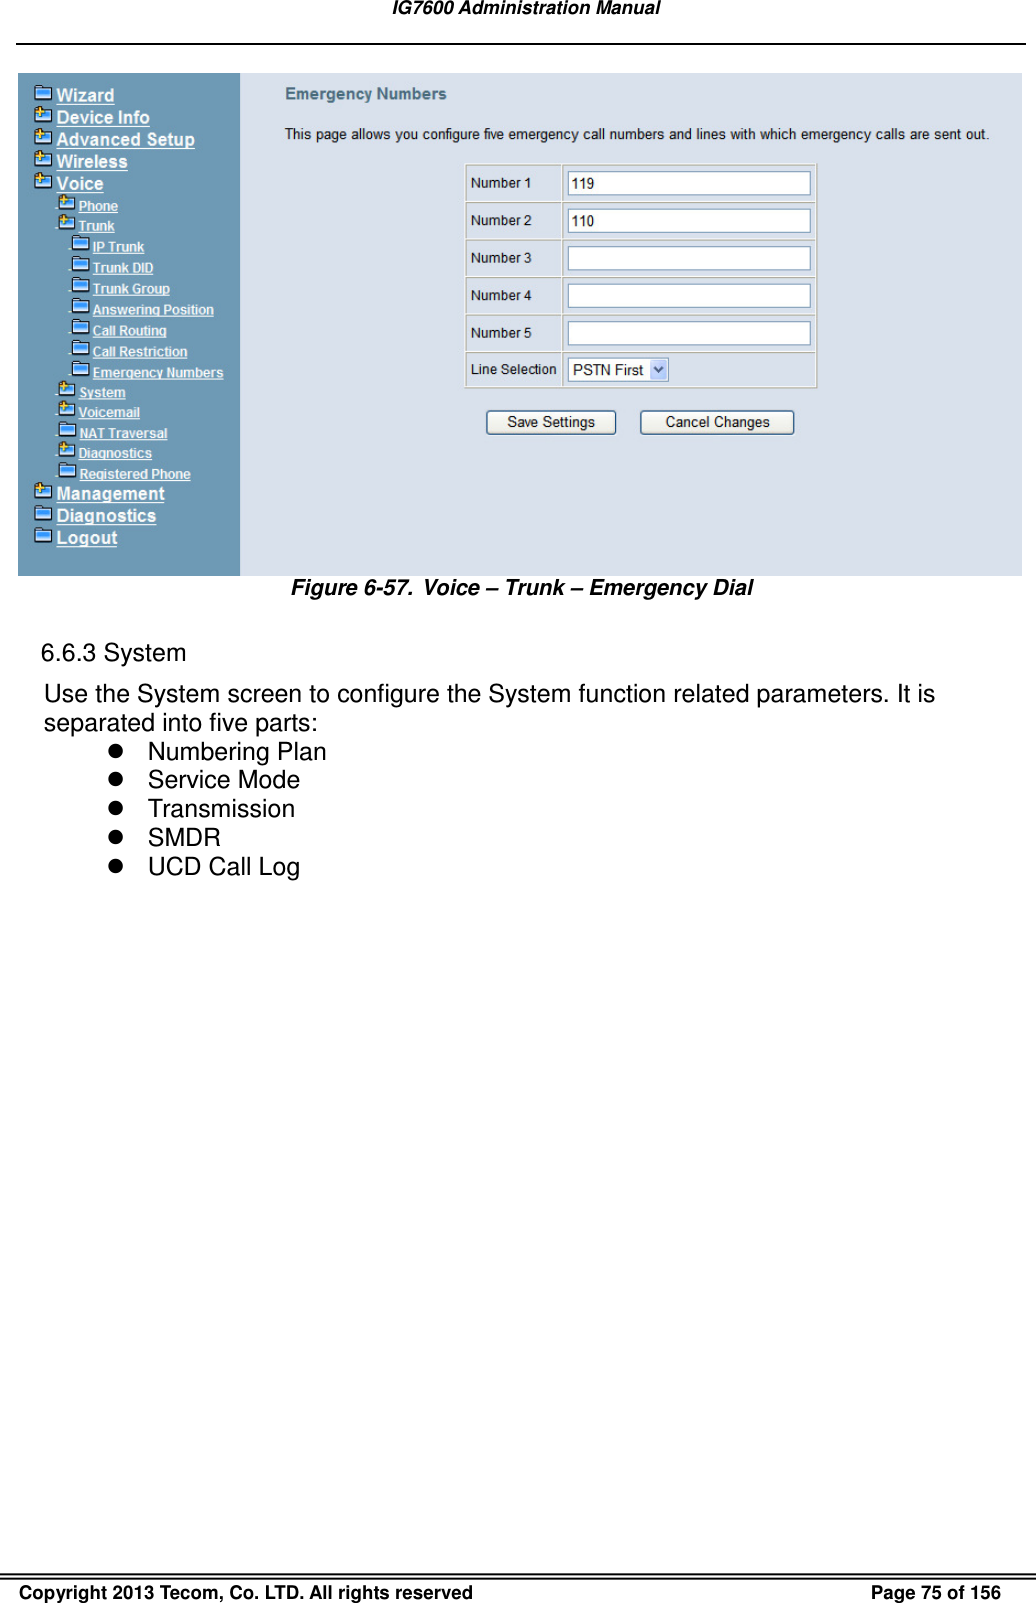   IG7600 Administration Manual  Copyright 2013 Tecom, Co. LTD. All rights reserved  Page 75 of 156  Figure 6-57.  Voice – Trunk – Emergency Dial  6.6.3 System Use the System screen to configure the System function related parameters. It is separated into five parts:   Numbering Plan   Service Mode   Transmission   SMDR   UCD Call Log 